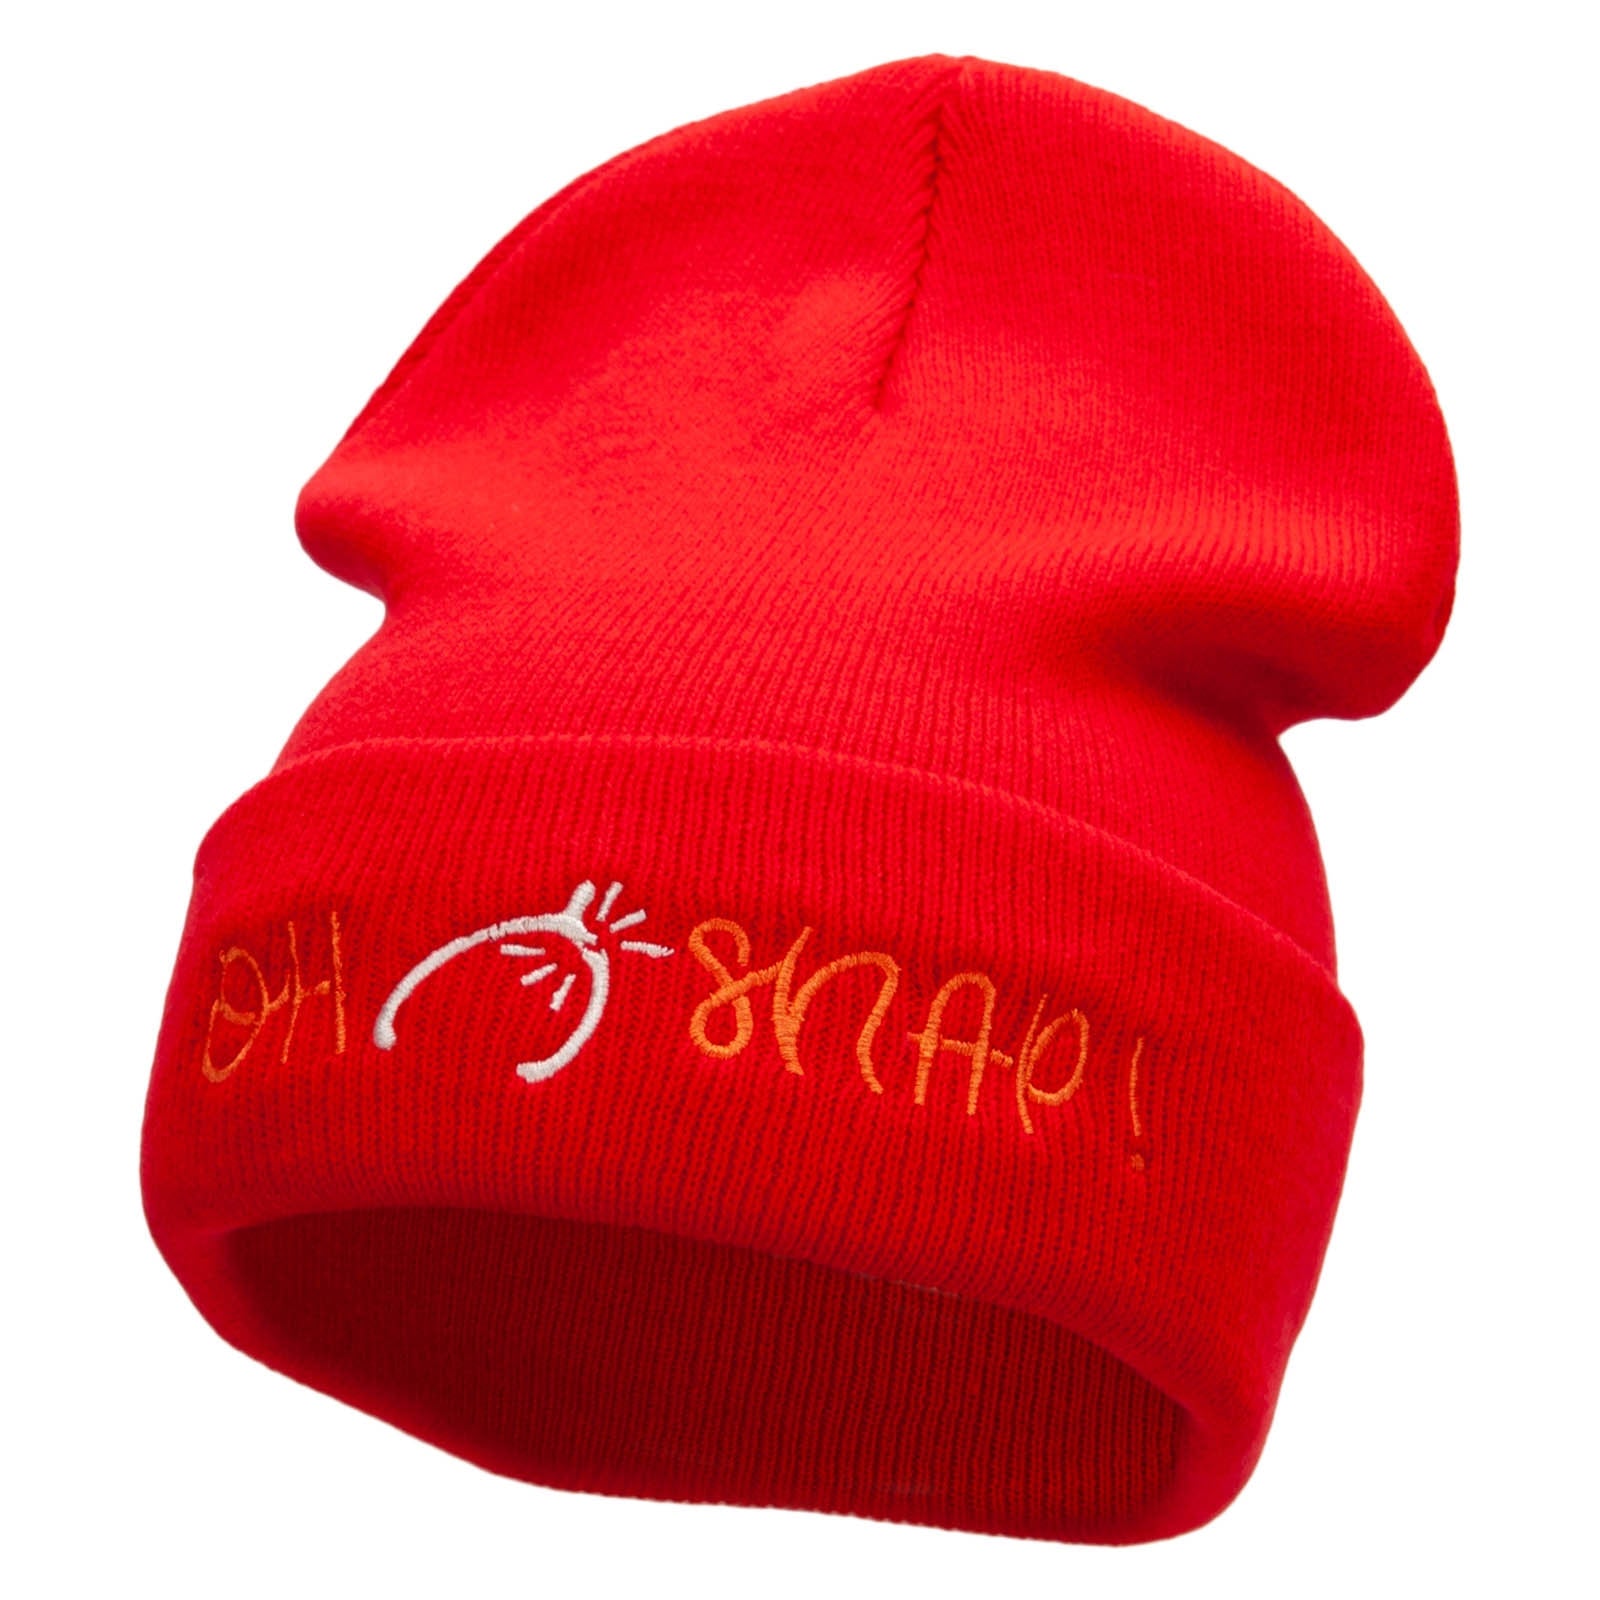 Oh Snap Embroidered 12 Inch Long Knitted Beanie - Red OSFM